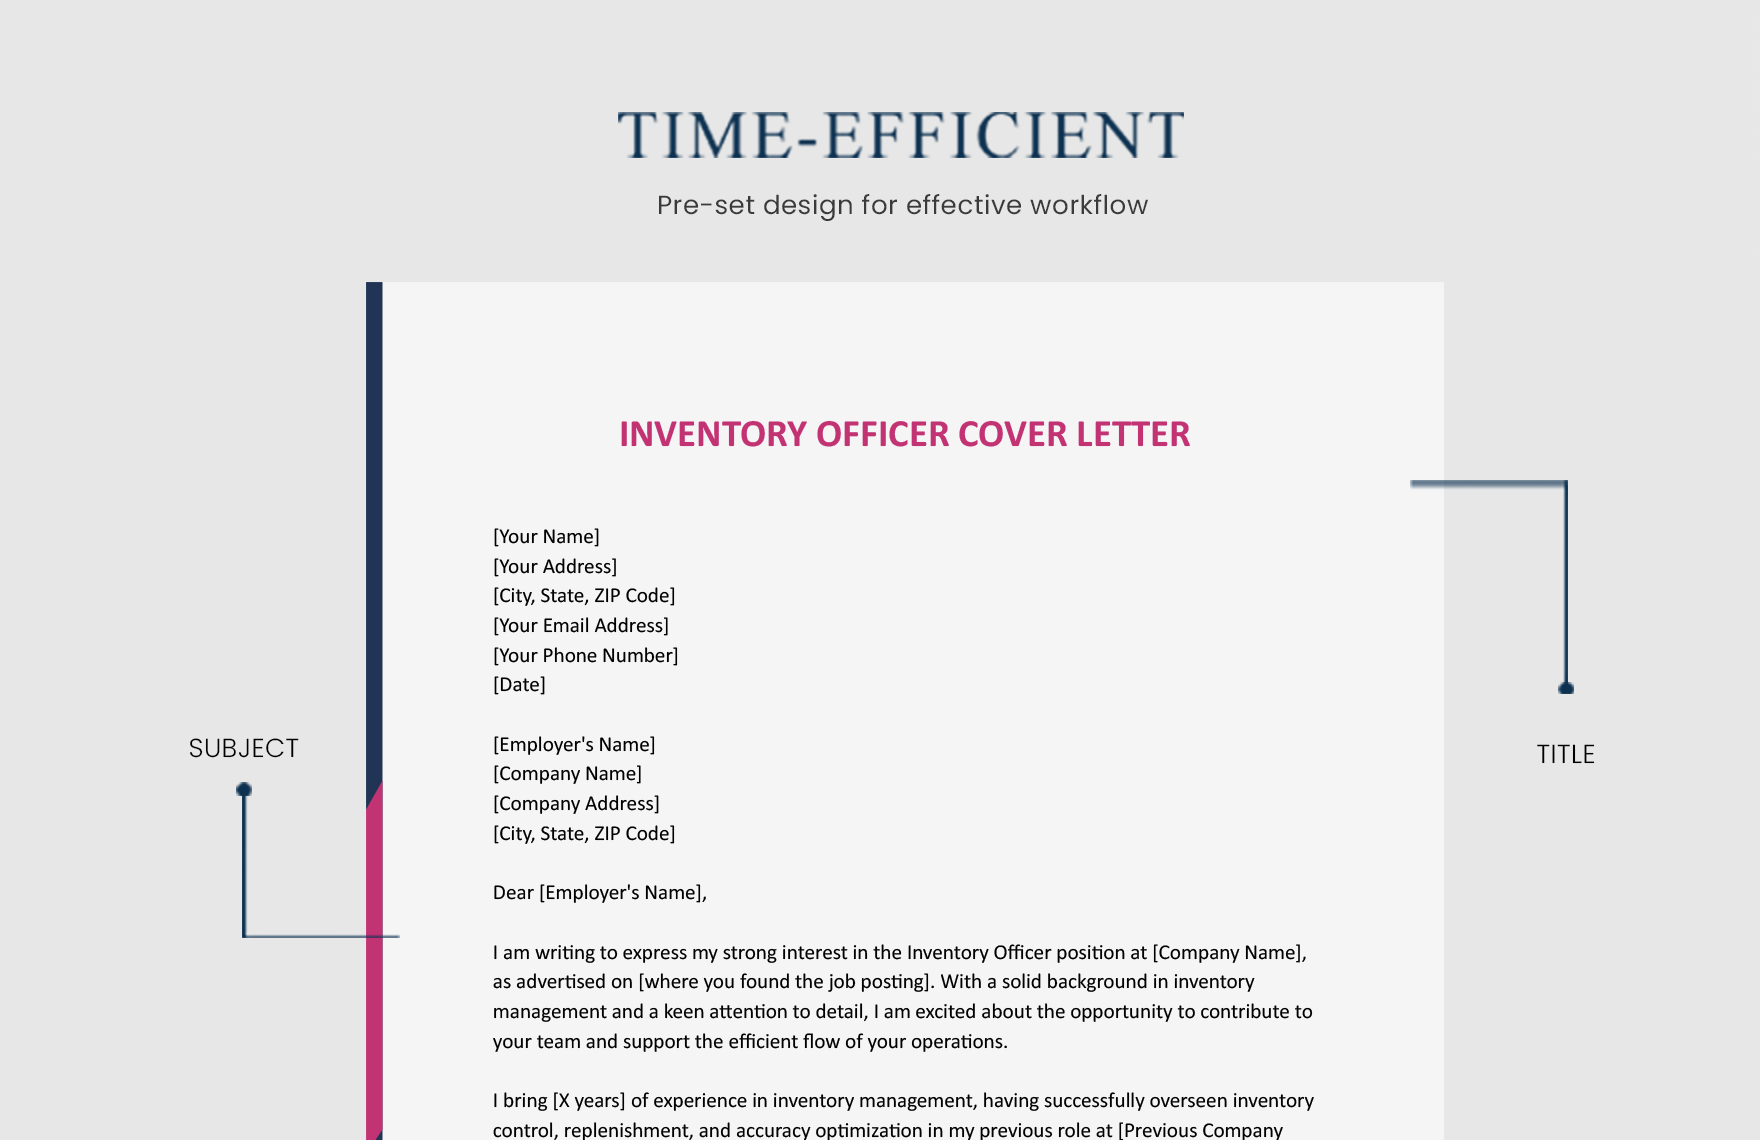 Inventory Officer Cover Letter